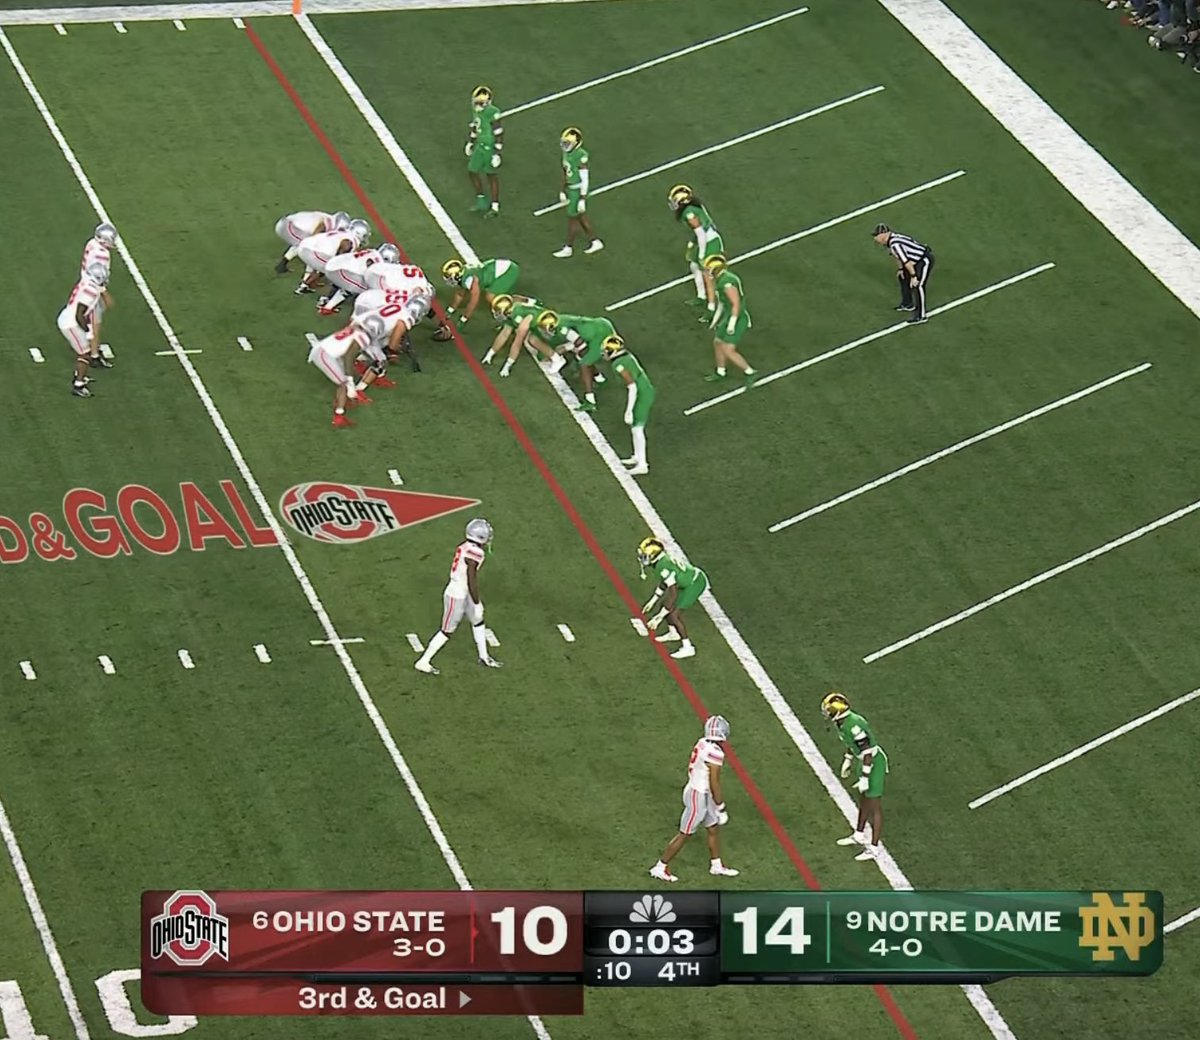 Notre Dame had 10 guys on the field for the Ohio State TD, missing a lineman. Right where OSU ran the ball.